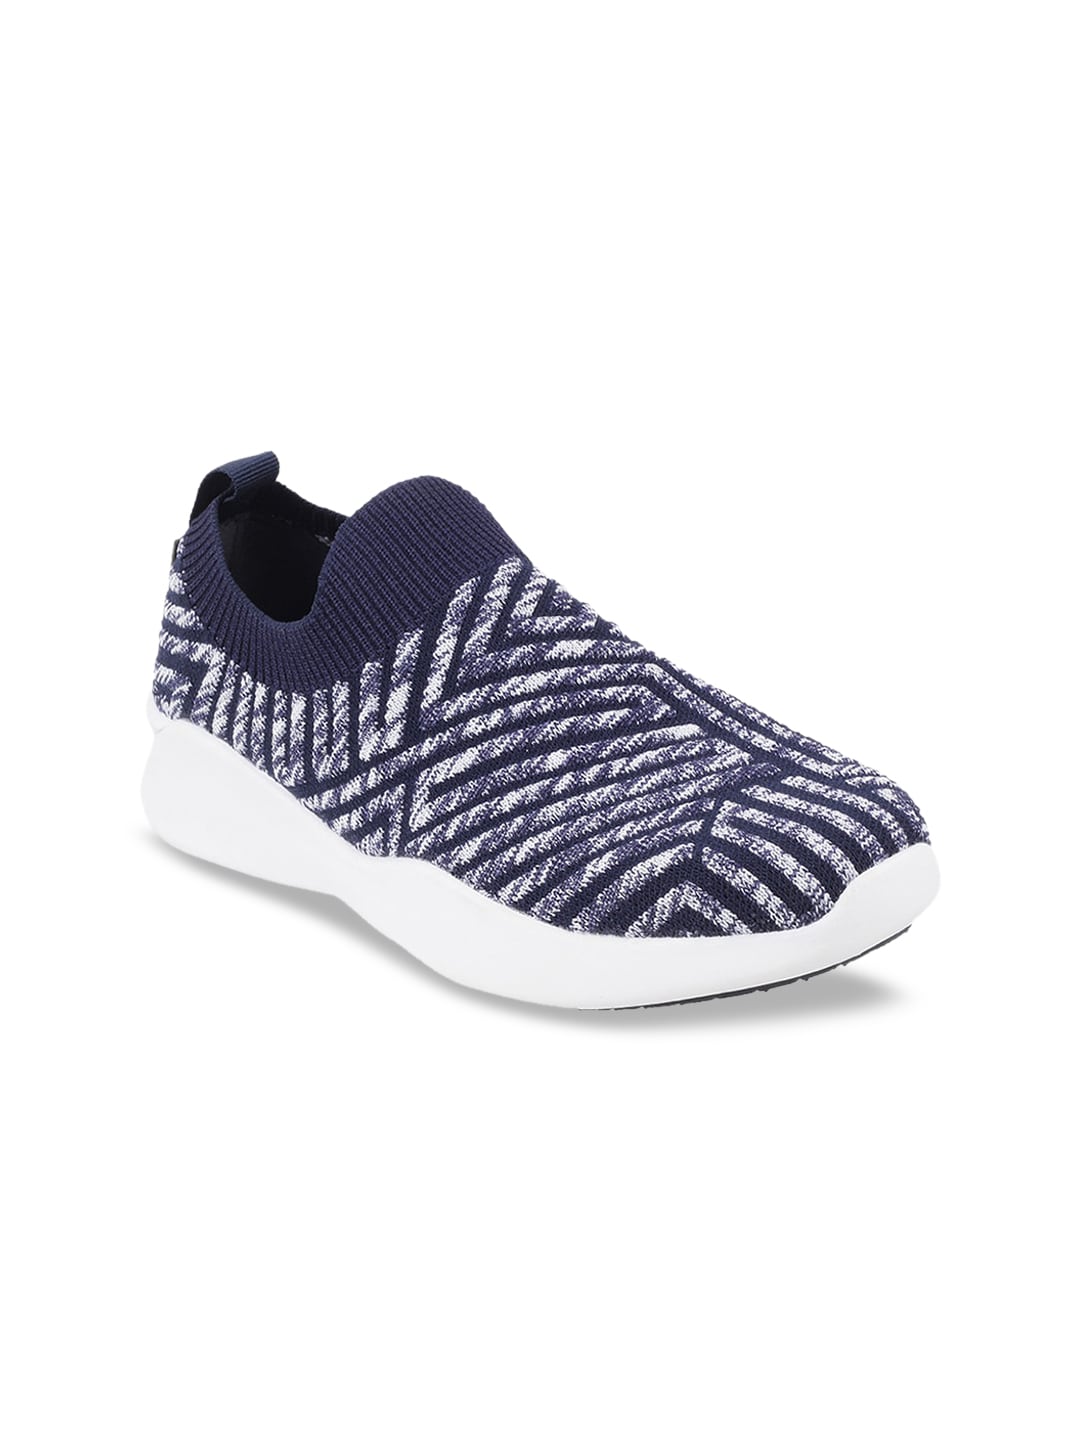 Mochi Women Blue & Off-White Sneakers Price in India